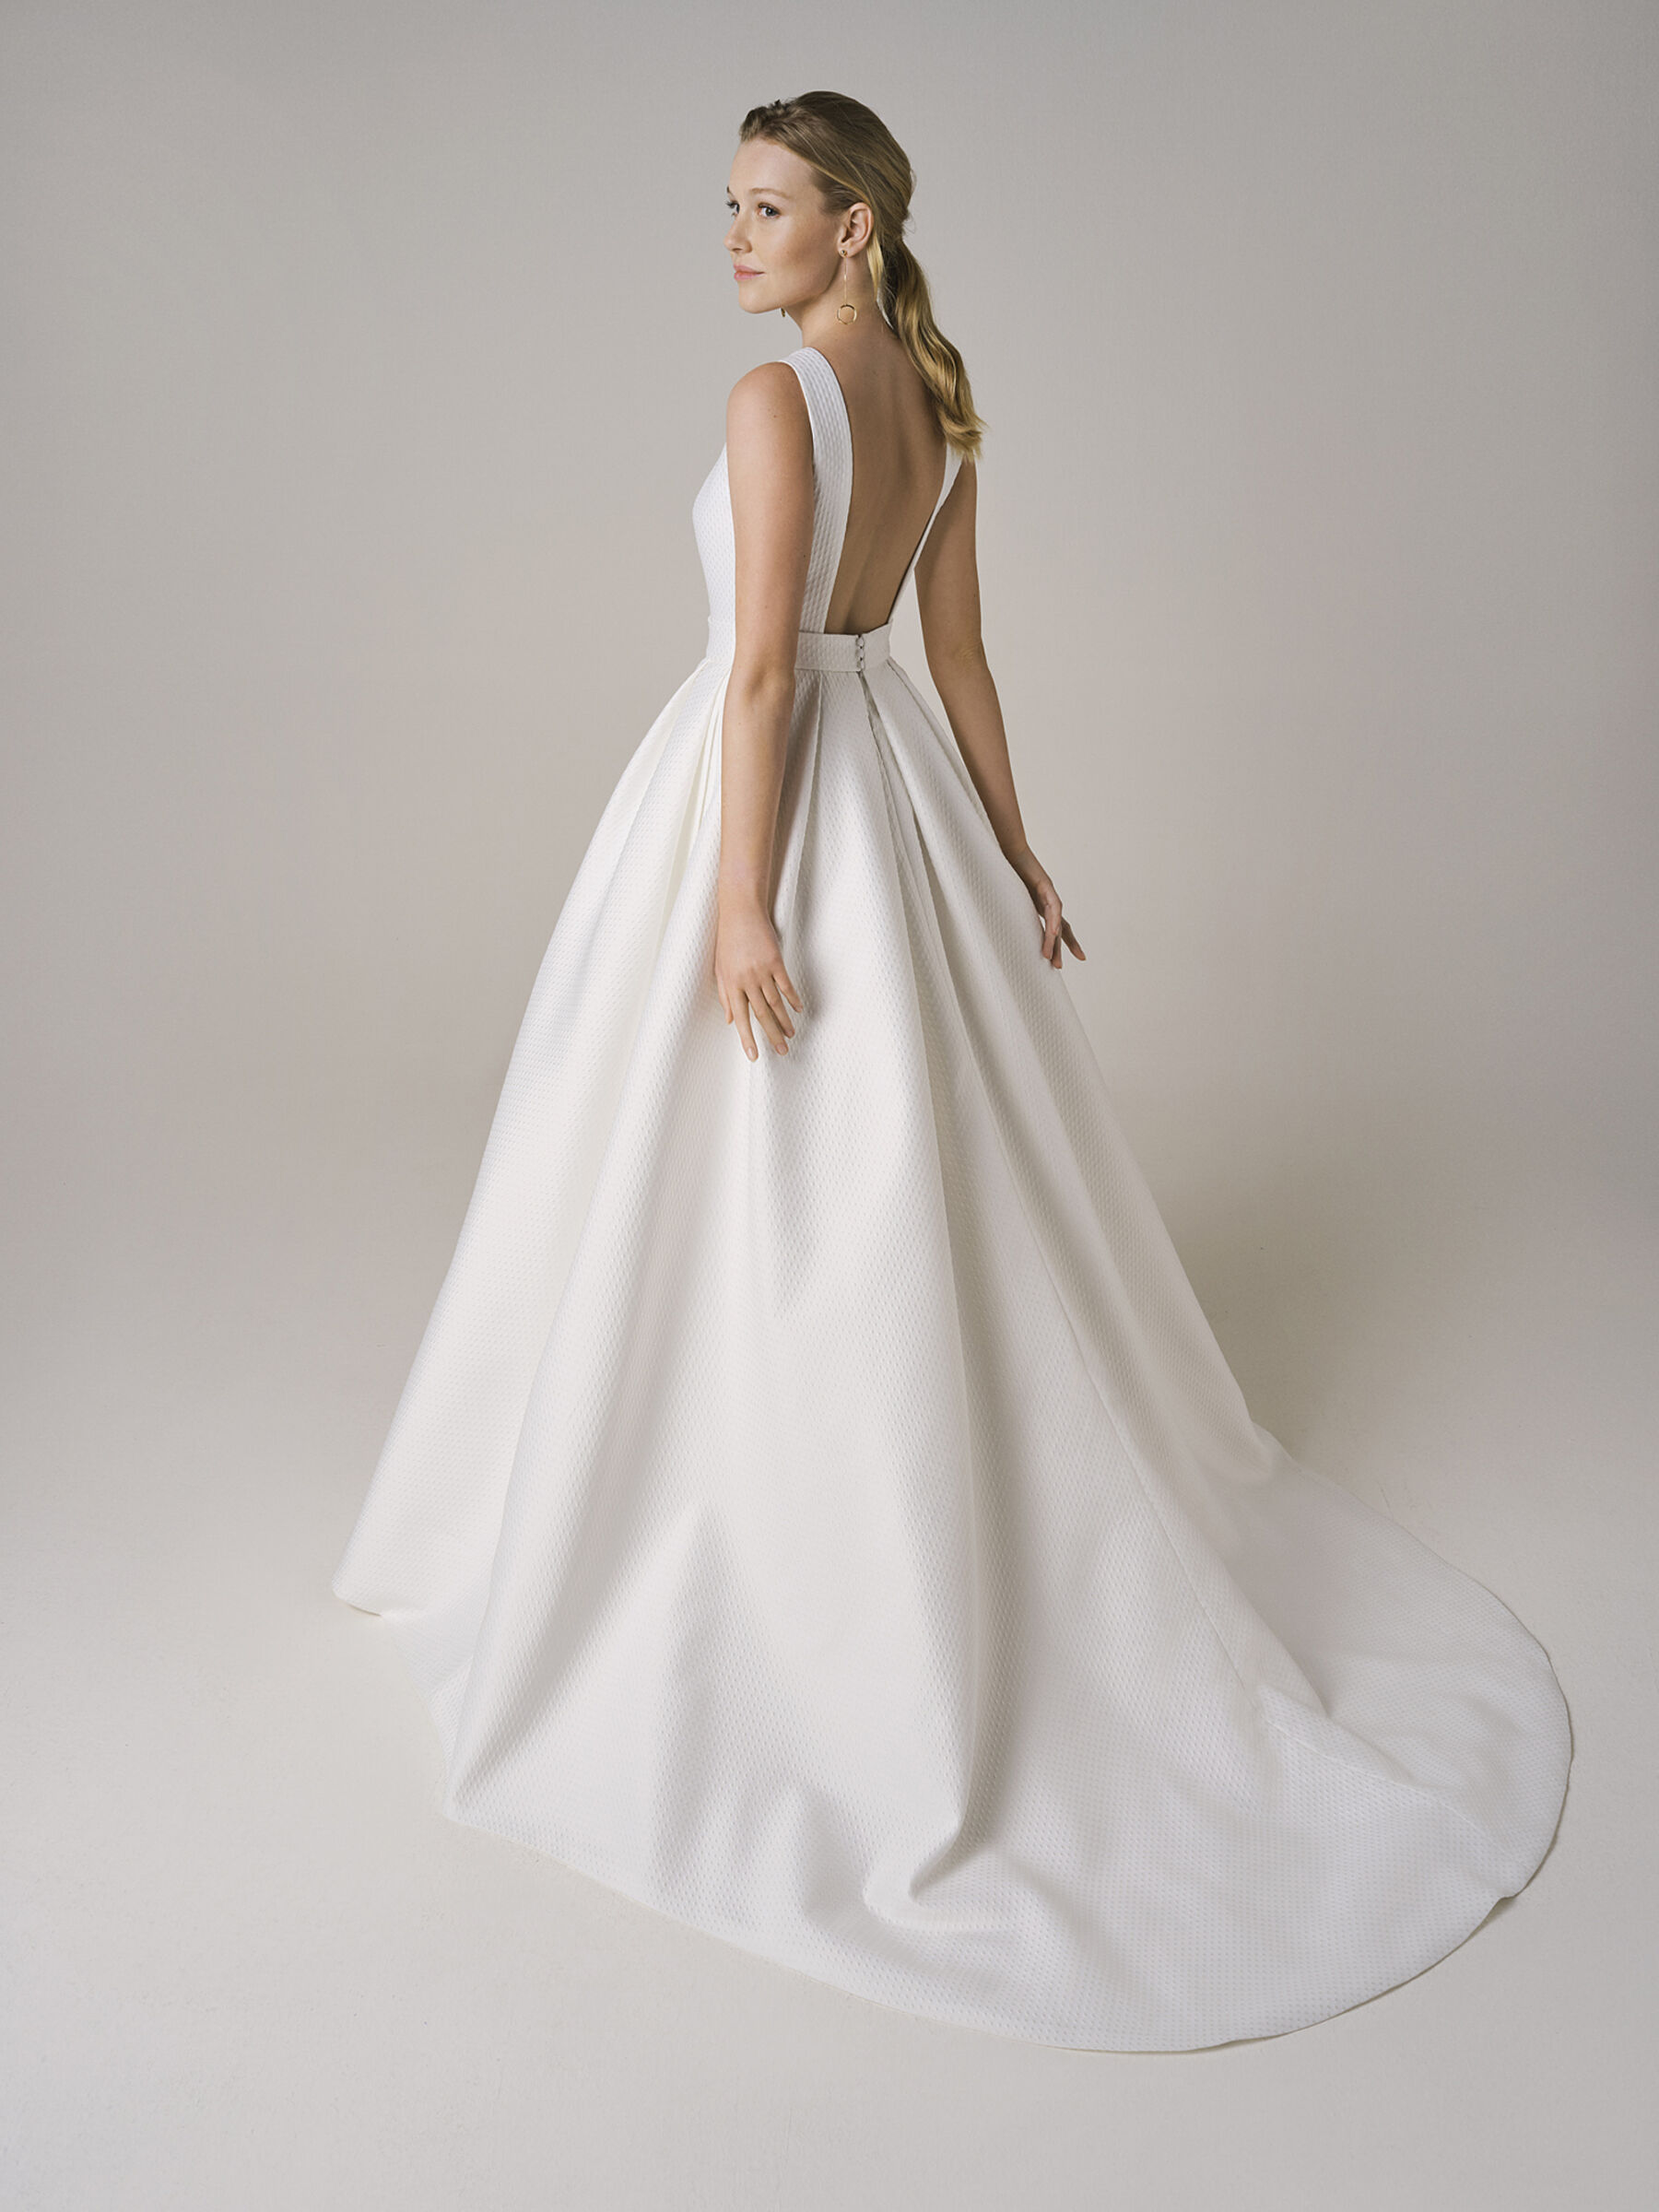 Jesus Peiro backless wedding dress. Available at the Miss Bush pop up sample sale, April 2023.